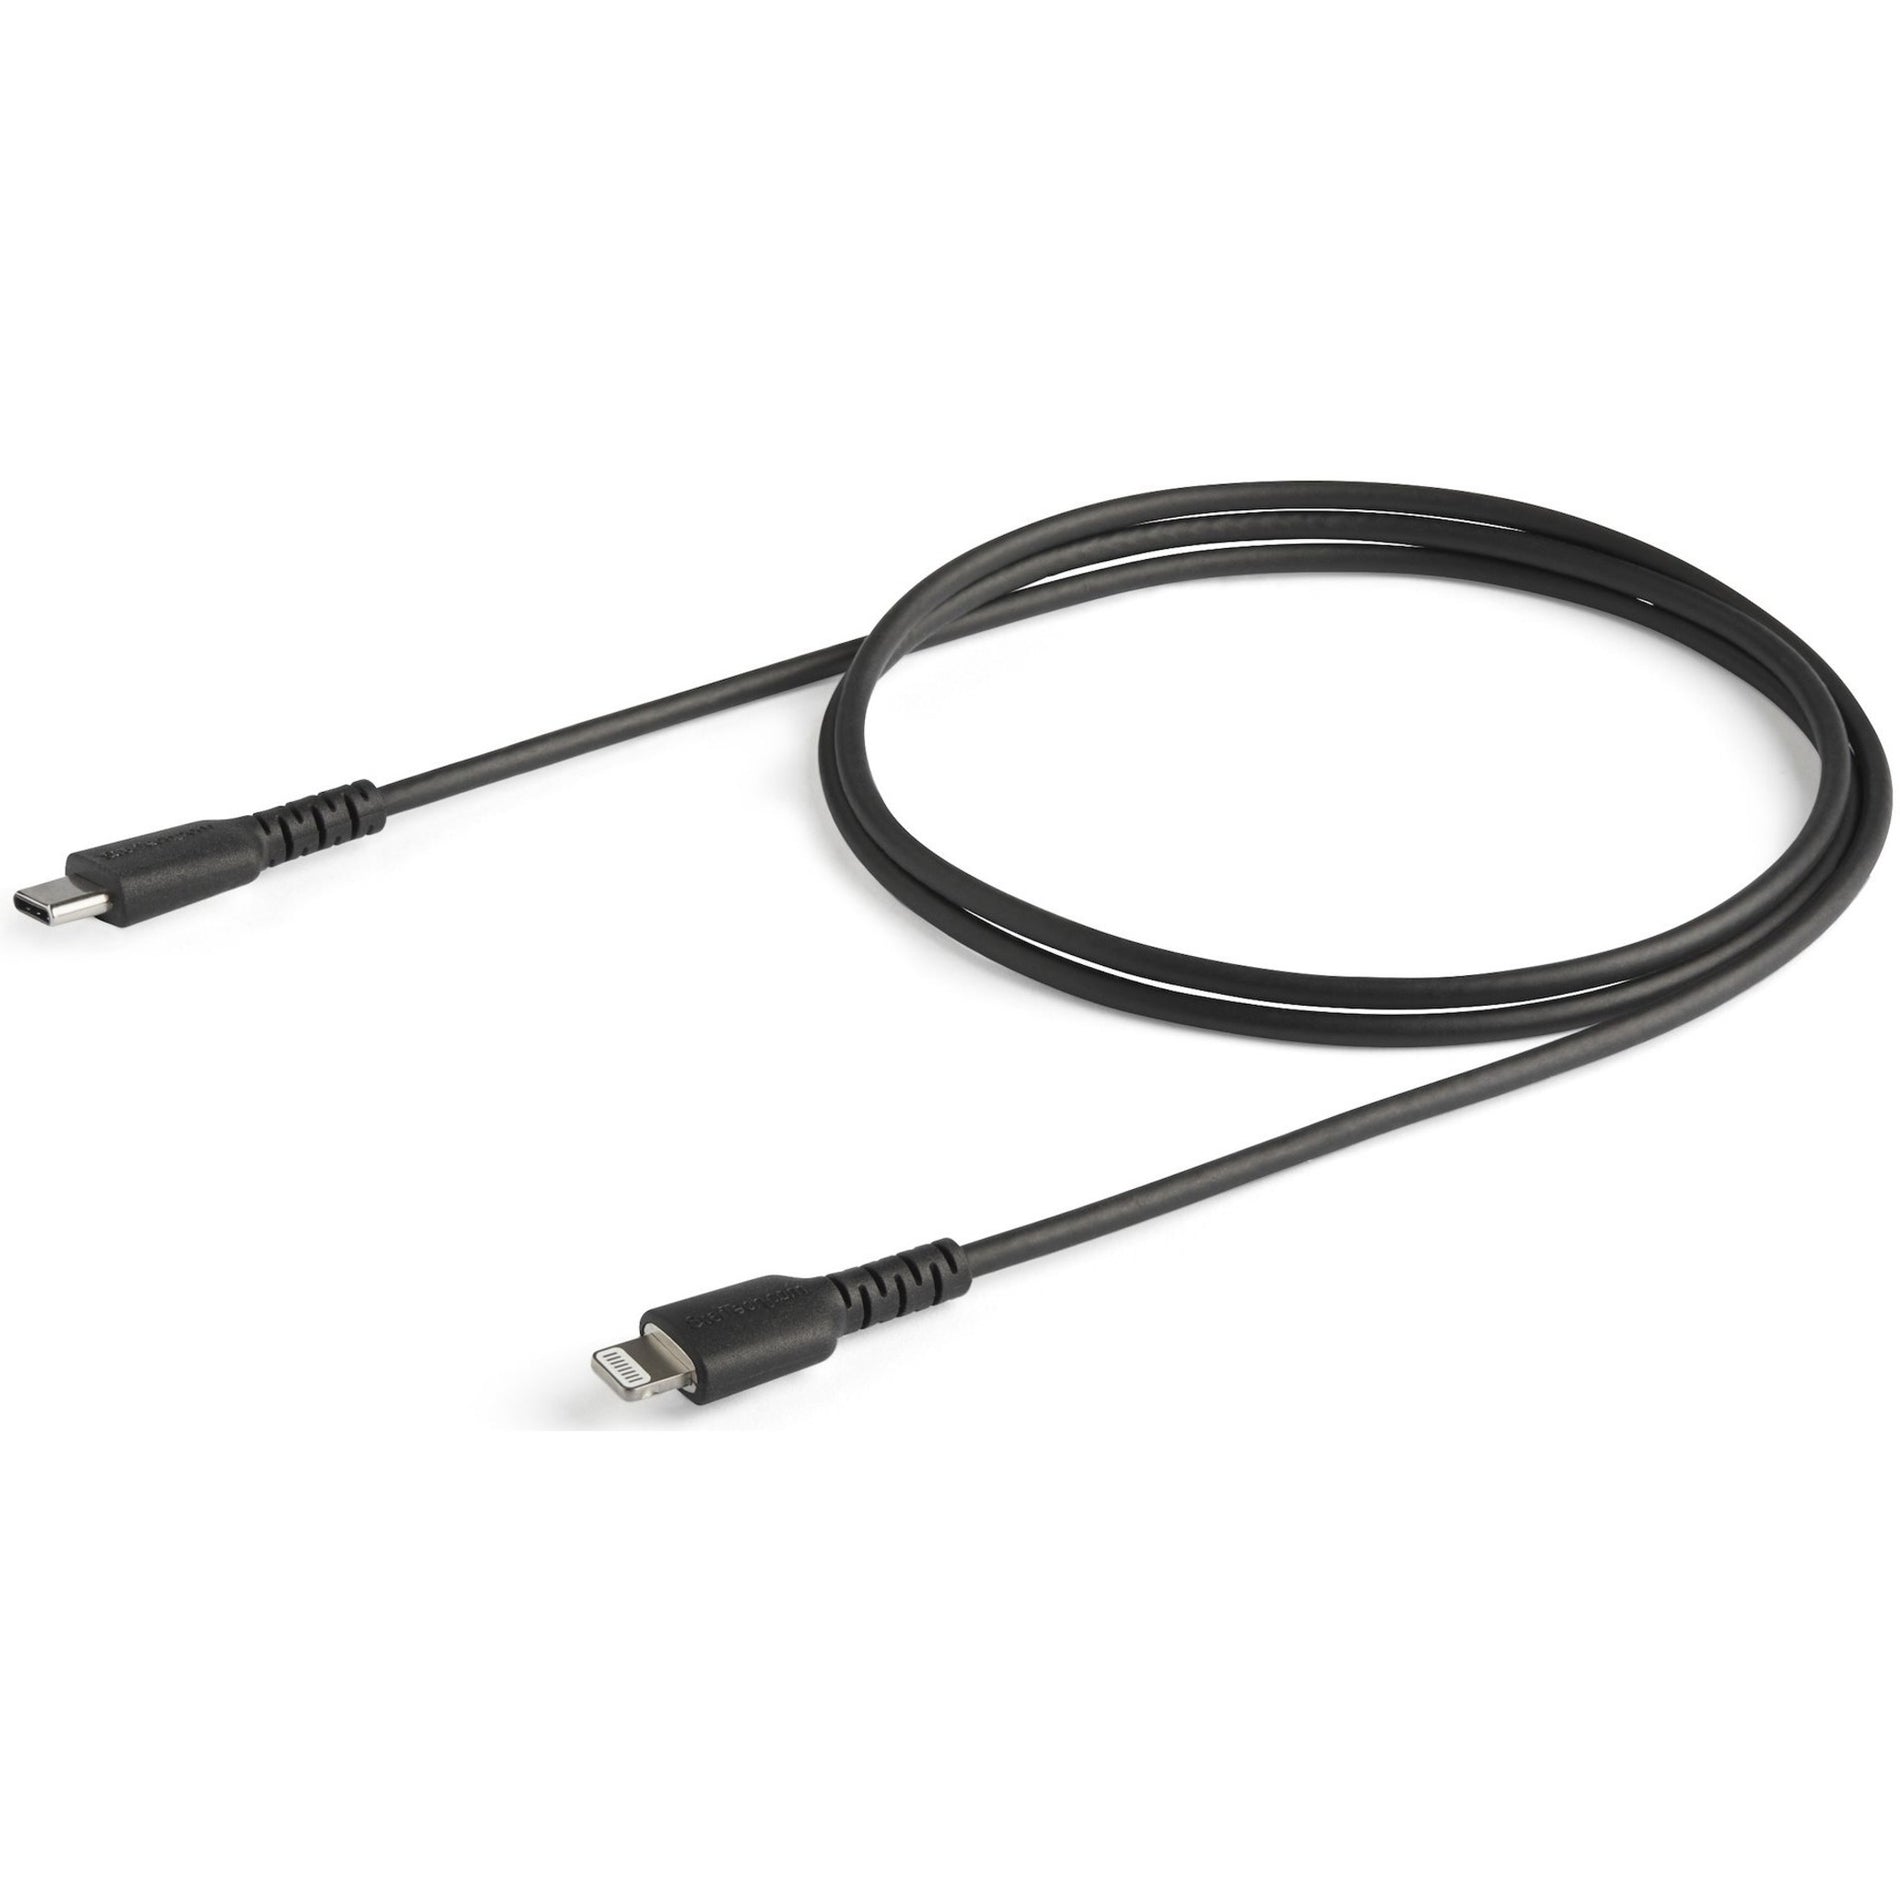 StarTech.com RUSBCLTMM1MB 1m/3.3ft USB C to Lightning Cable - MFi Certified, Heavy Duty Lightning Cable, Black, Durable USB Charging Cable